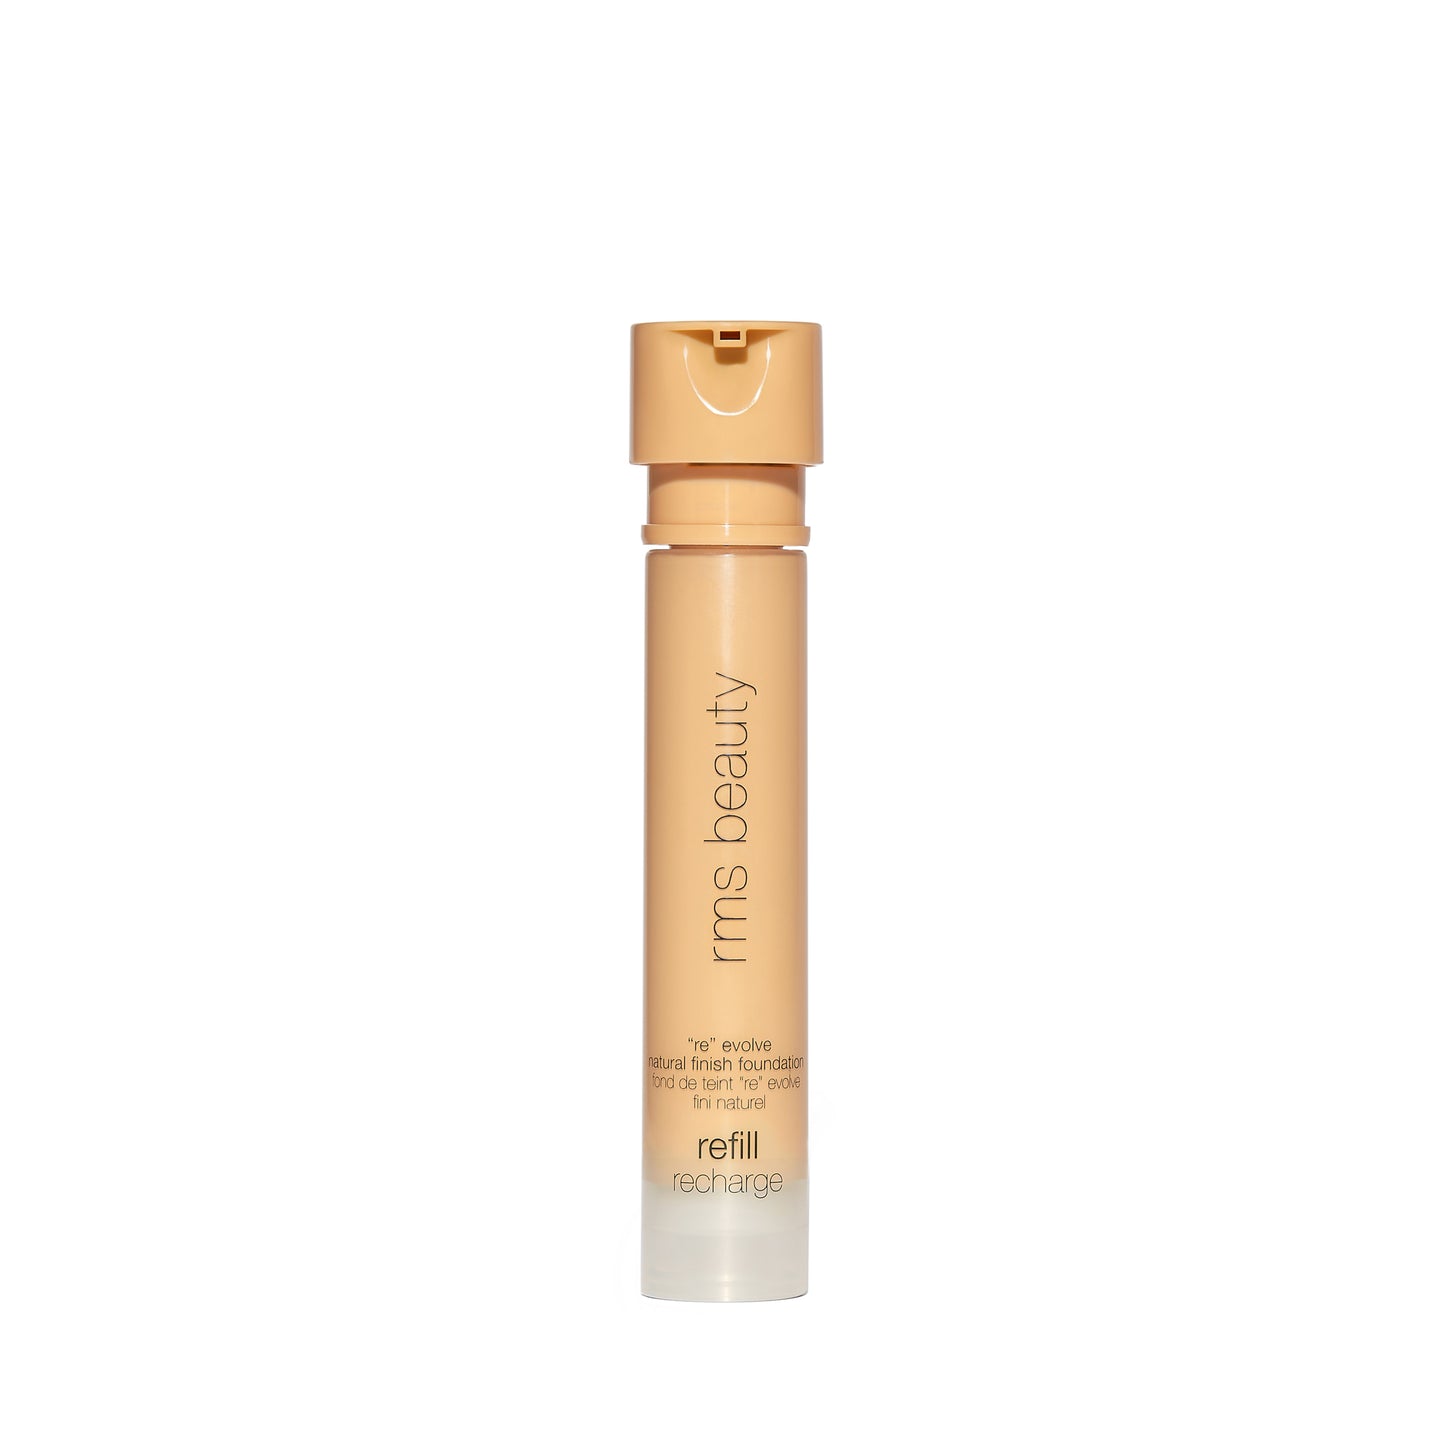 rms - REFILL ReEvolve natural finish foundation 29ml